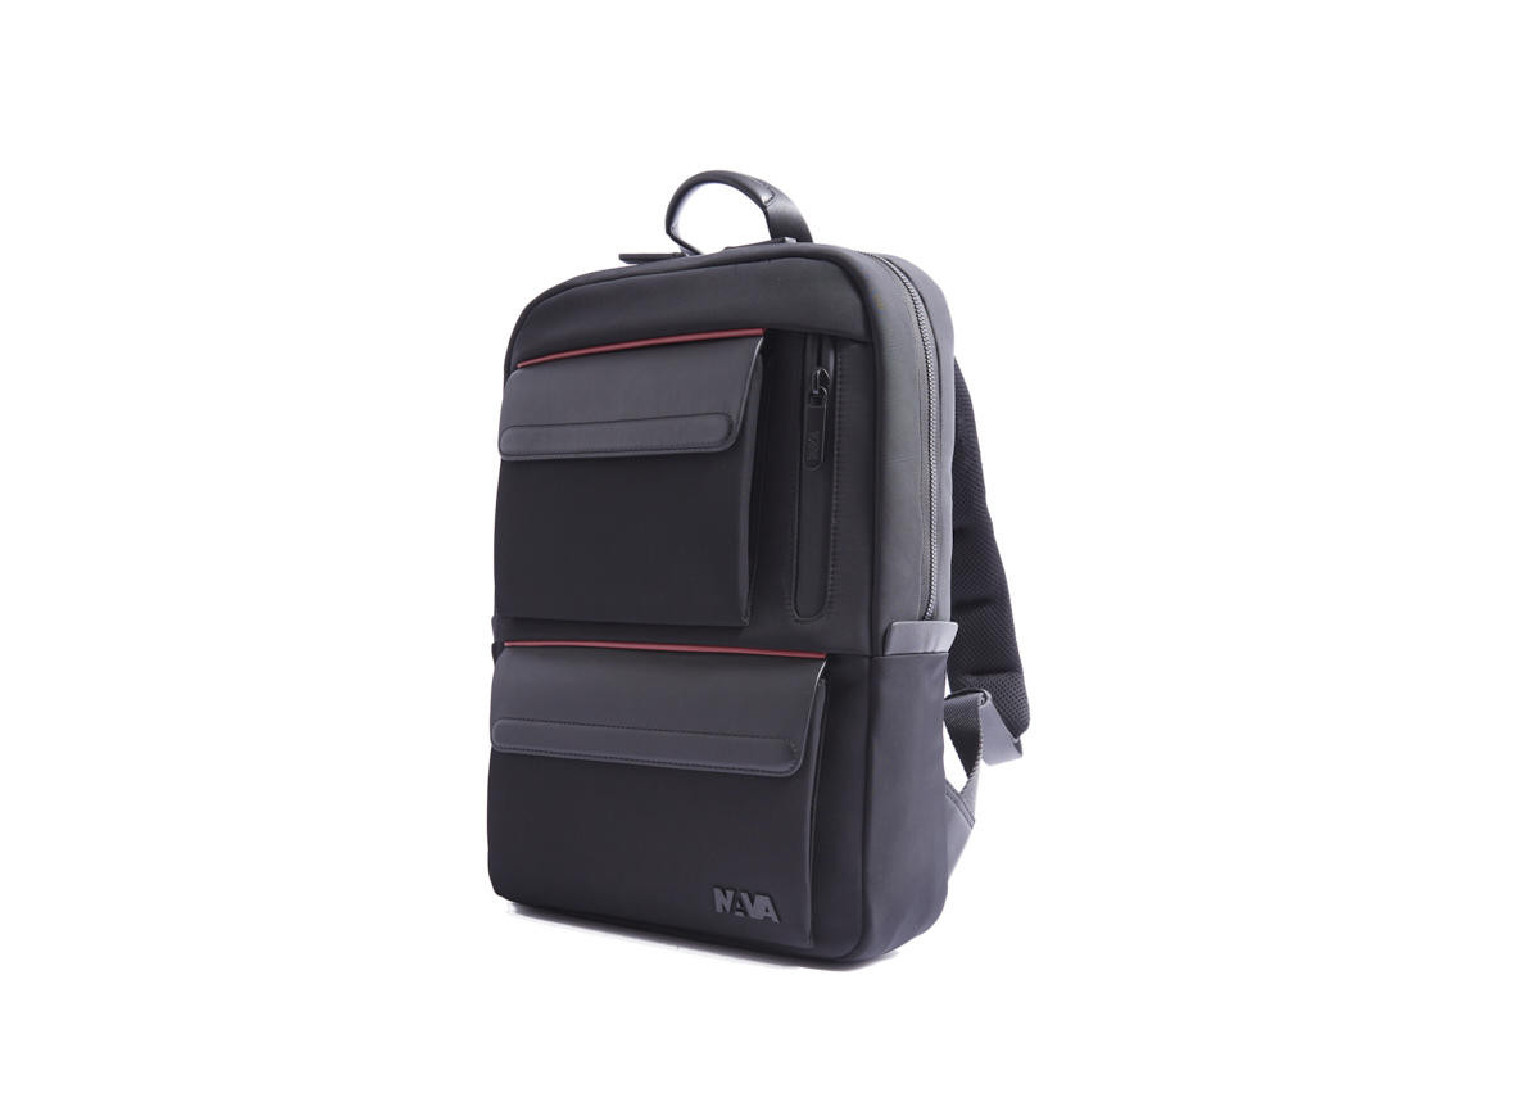 NAVA METRO ORGANIZED LEATHER BACKPACK 1 COMPARTMENTS WITH 2 FRONT POCKETS BLACK RED